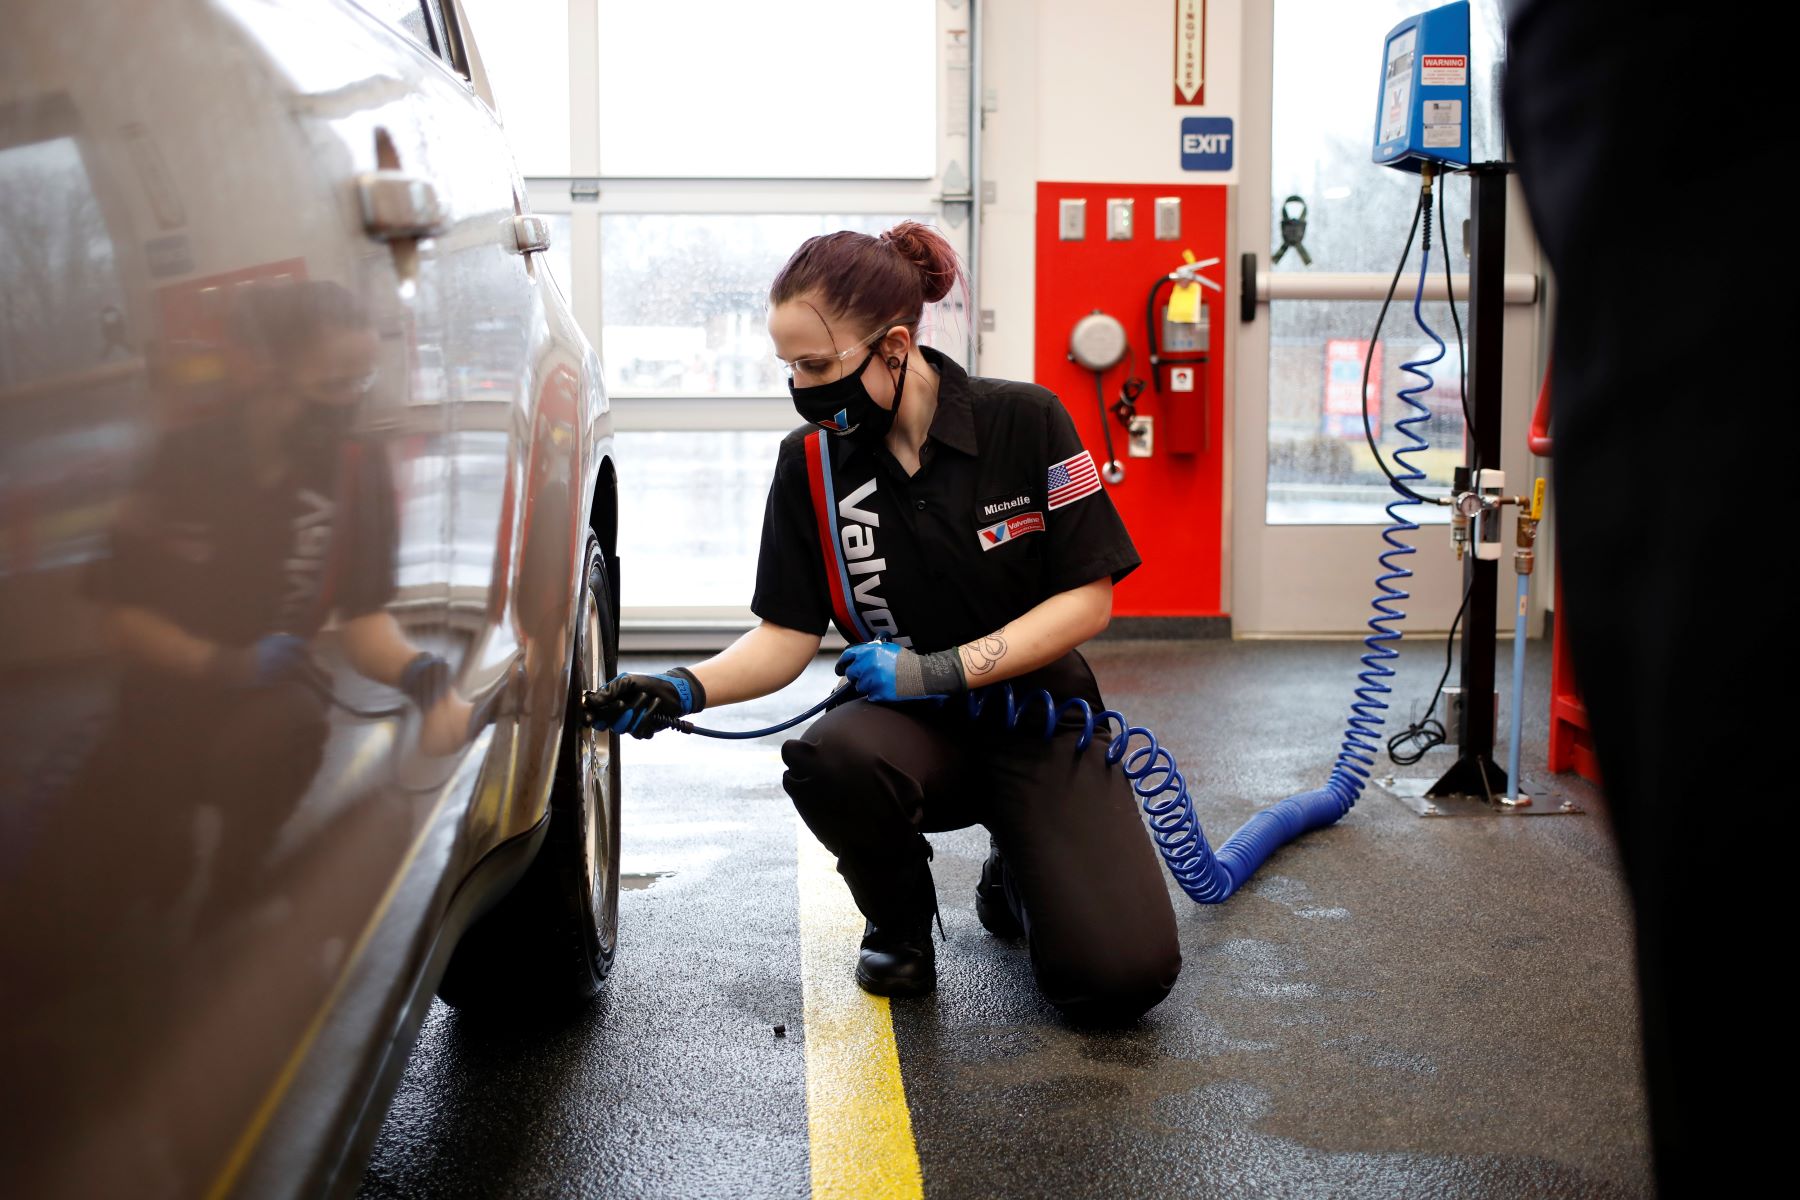 A Valvoline worker checking tire pressure, which is one of 10 bad driving habits to keep an eye on